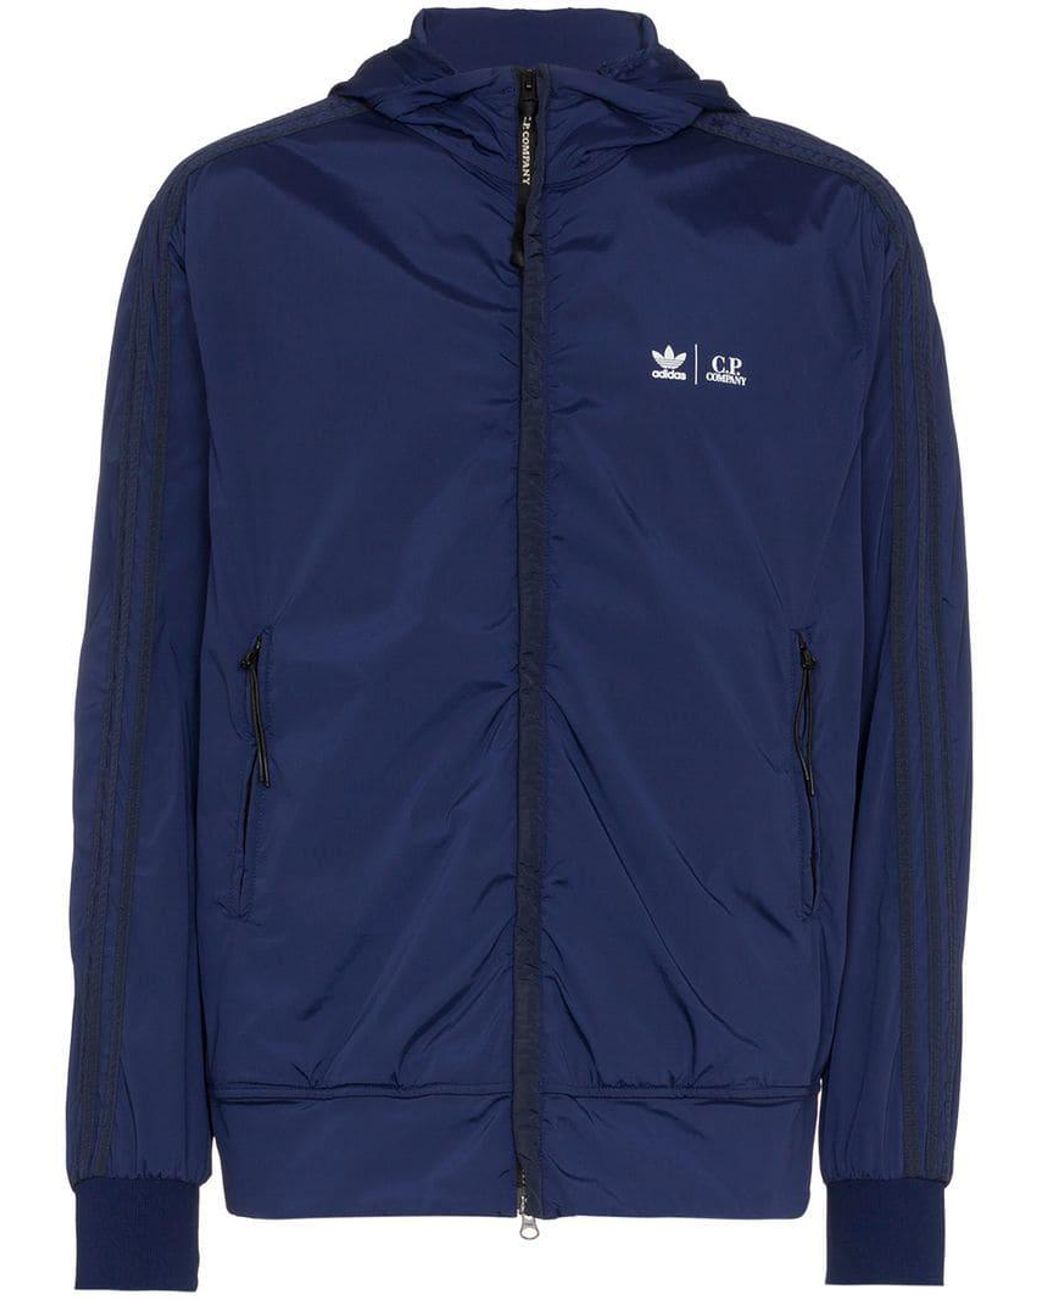 adidas X Cp Company Stripe Sleeve Track Jacket in Blue for Men | Lyst UK